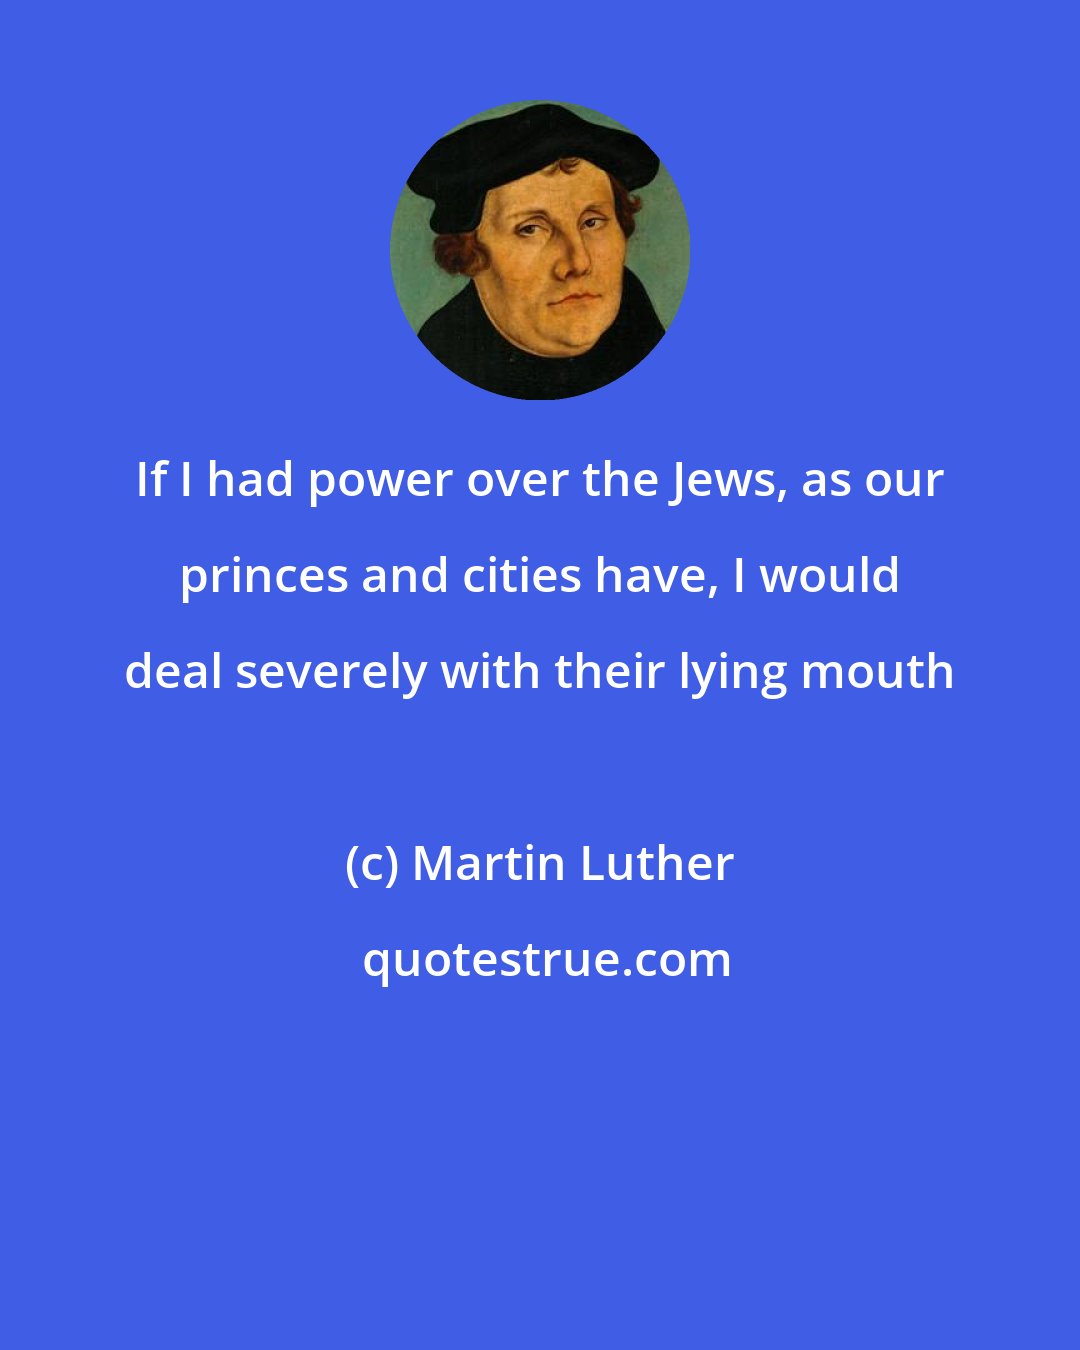 Martin Luther: If I had power over the Jews, as our princes and cities have, I would deal severely with their lying mouth